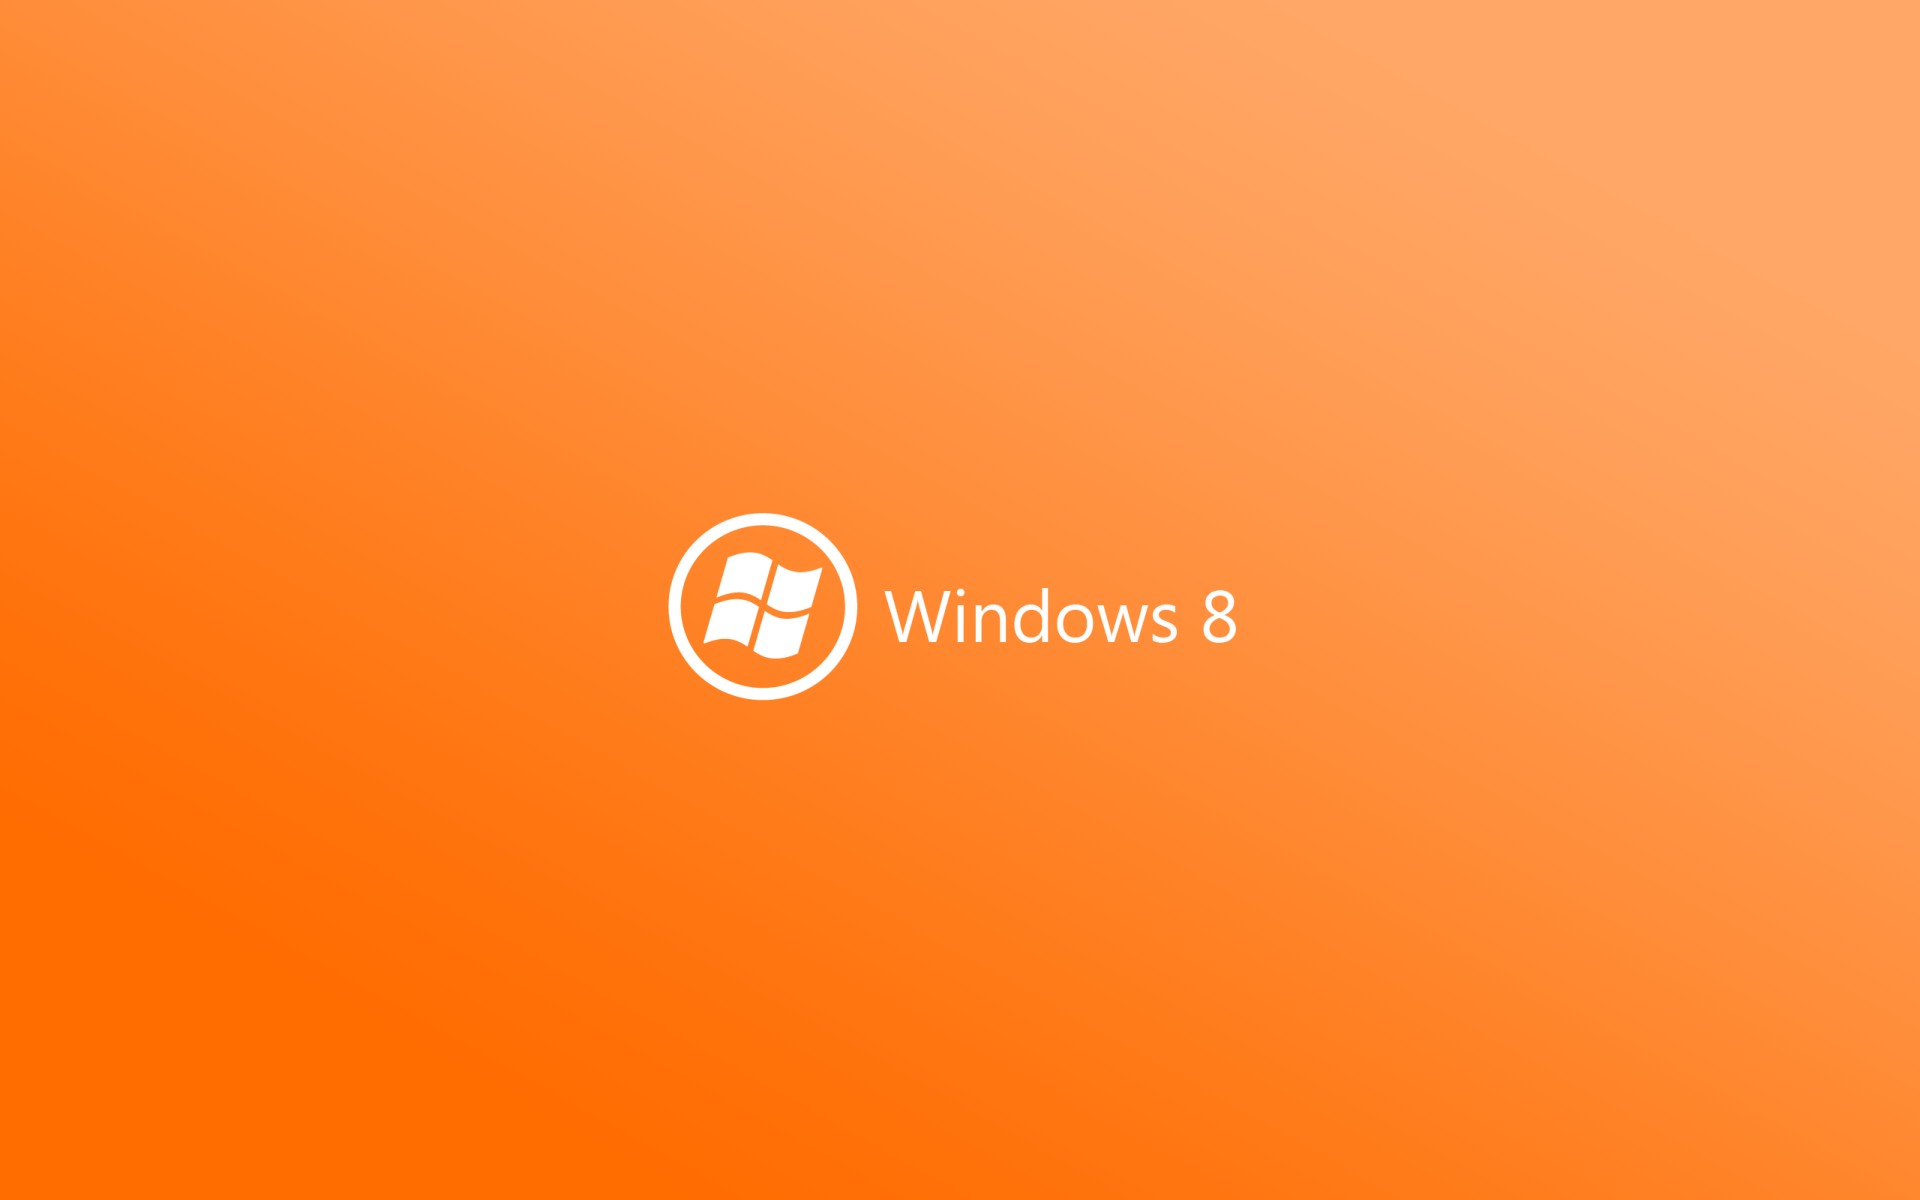 Windows 8 hd wallpapers Your Geeky Backgrounds